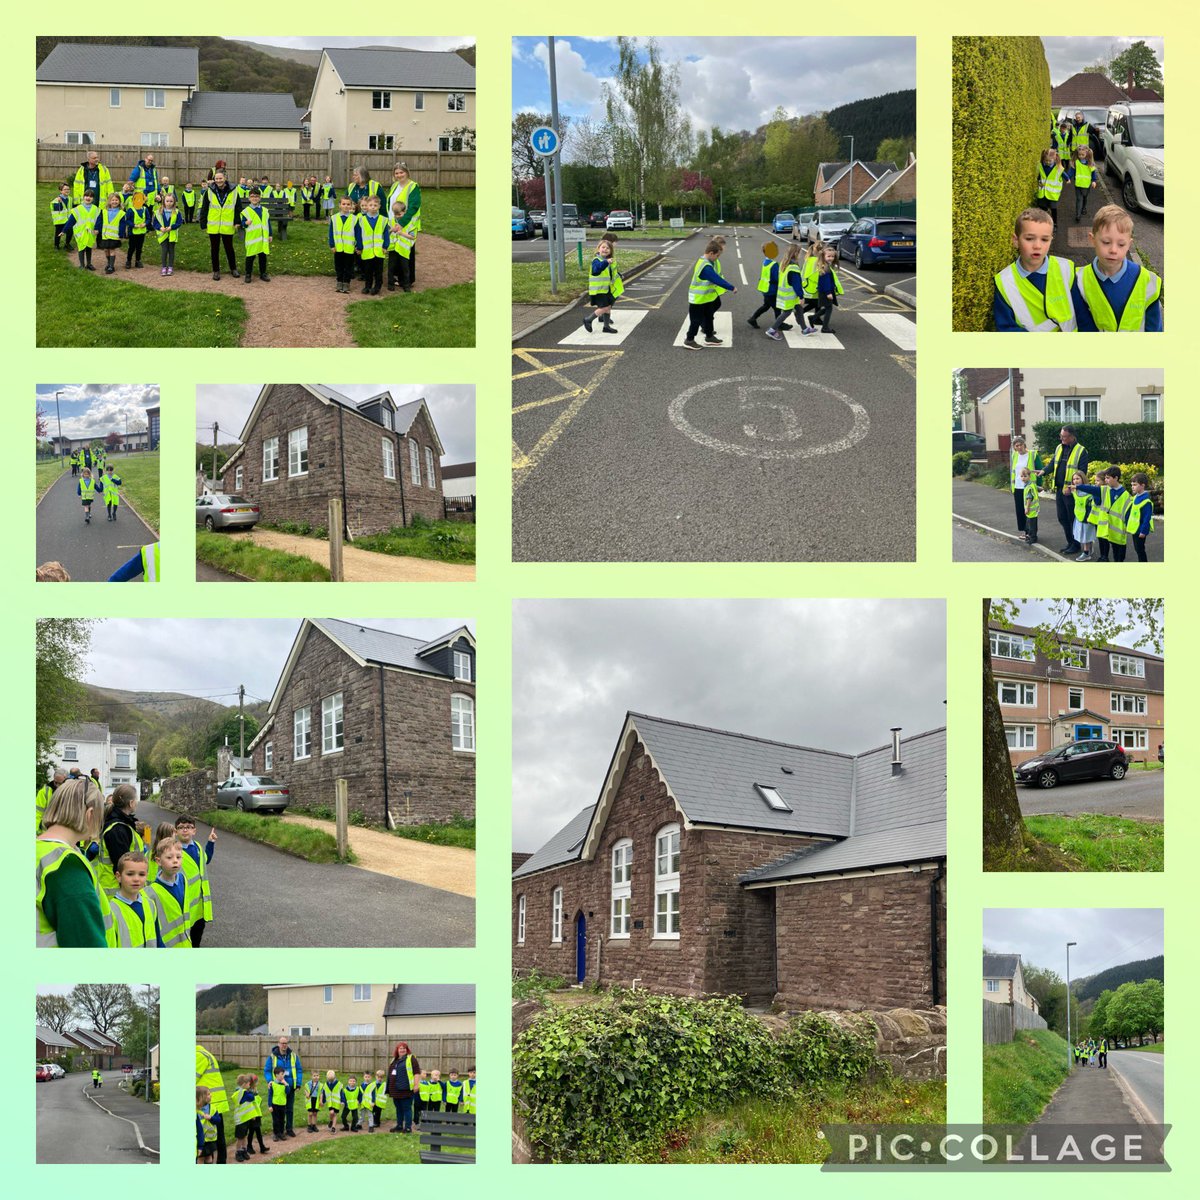 Dosbarth 1 had a very successful walk around the village to visit the old school. Diolch yn fawr to our Kerbcraft teachers who helped us get there safely! @Mon_RoadSafety #HealthyCondidentInsividuals